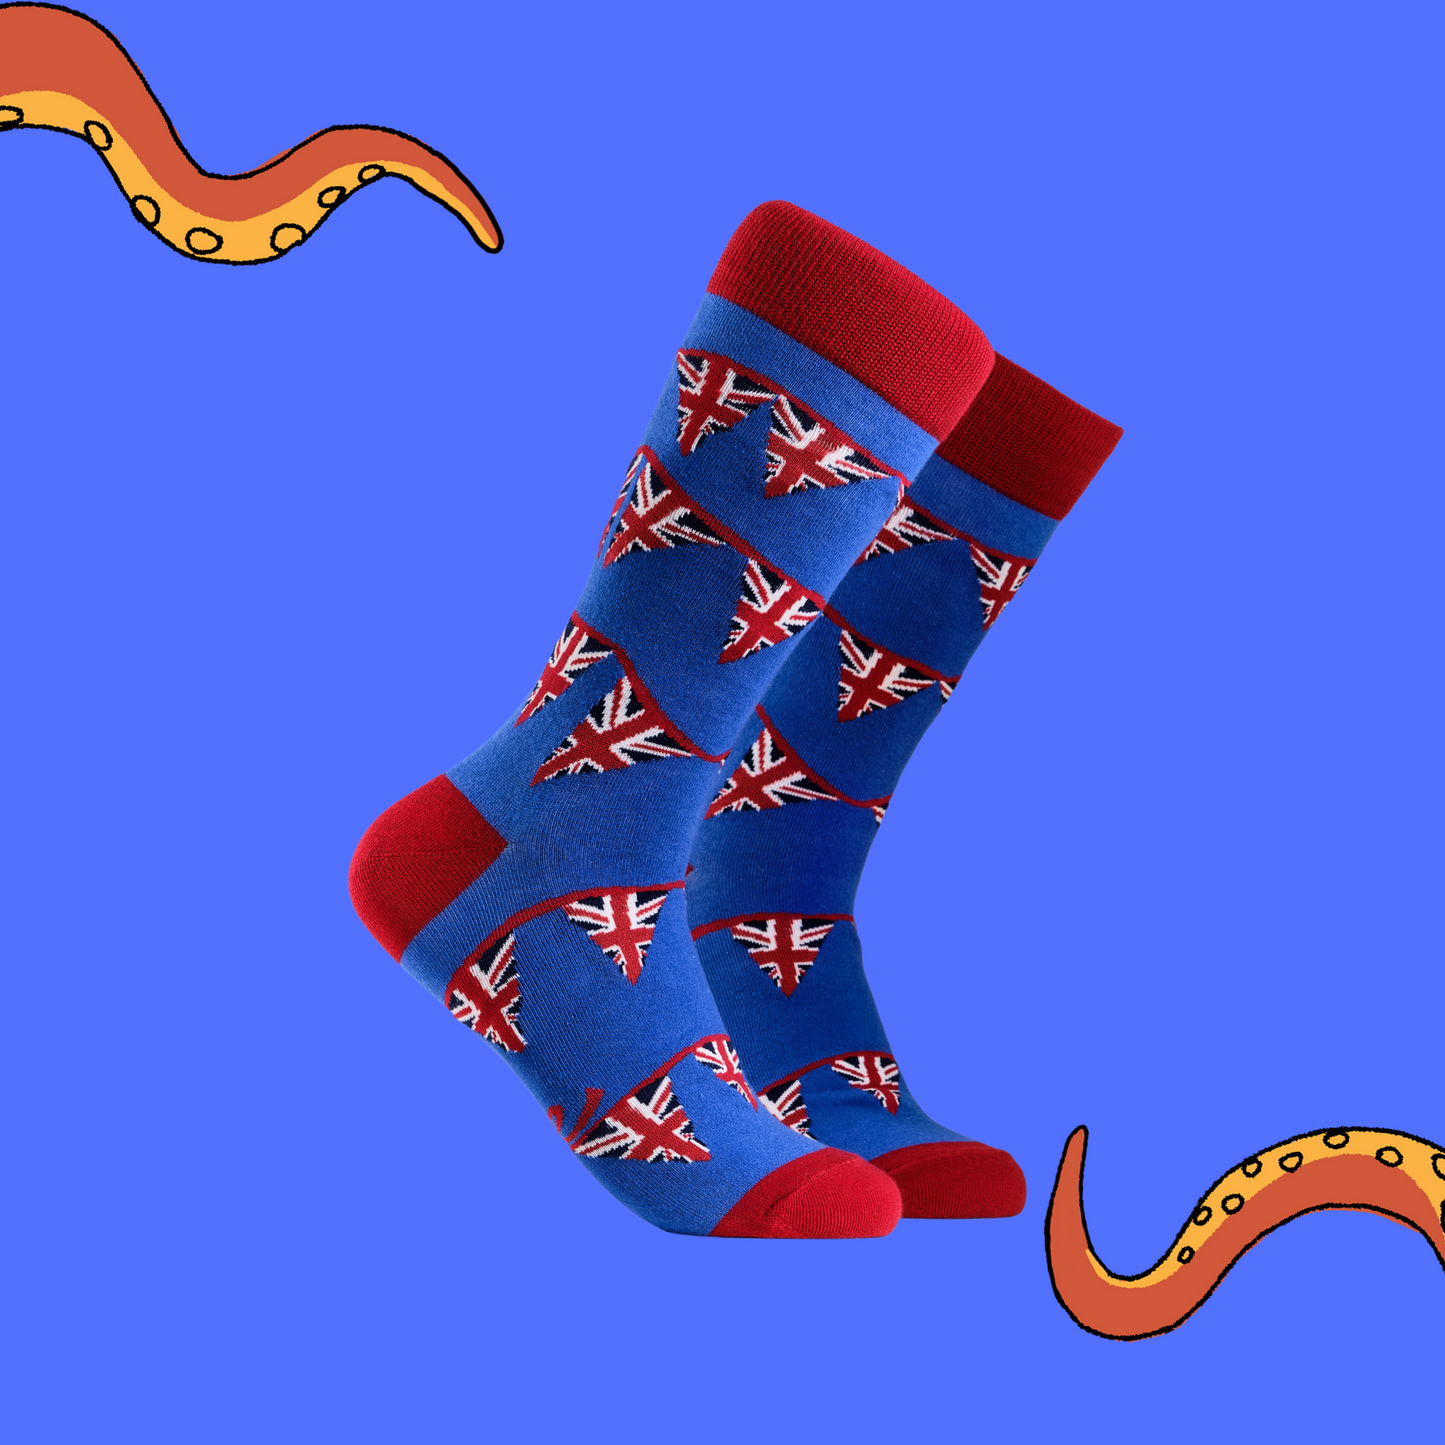 A pair of socks depicting Union Jack bunting. Blue legs, red cuff, heel and toe.